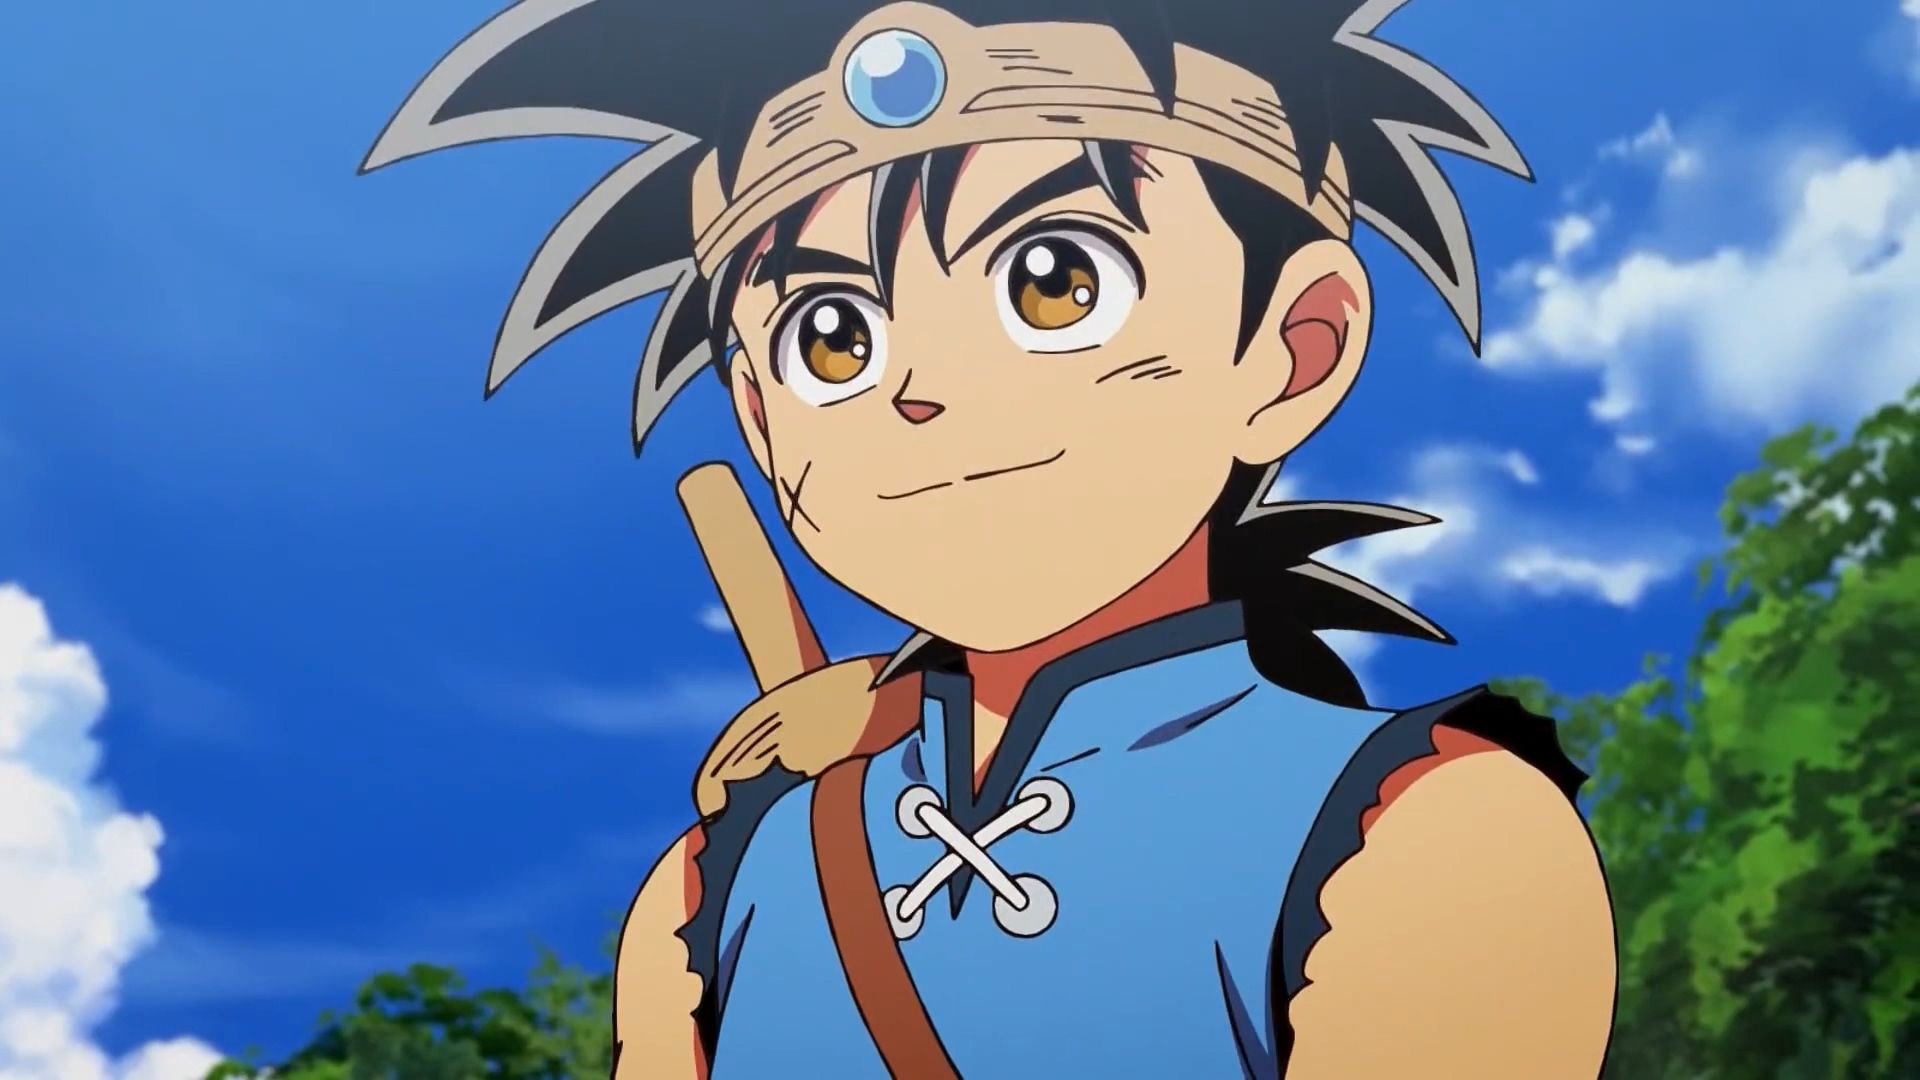 Japan: Dragon Quest: The Adventure of Dai anime airs 3rd October